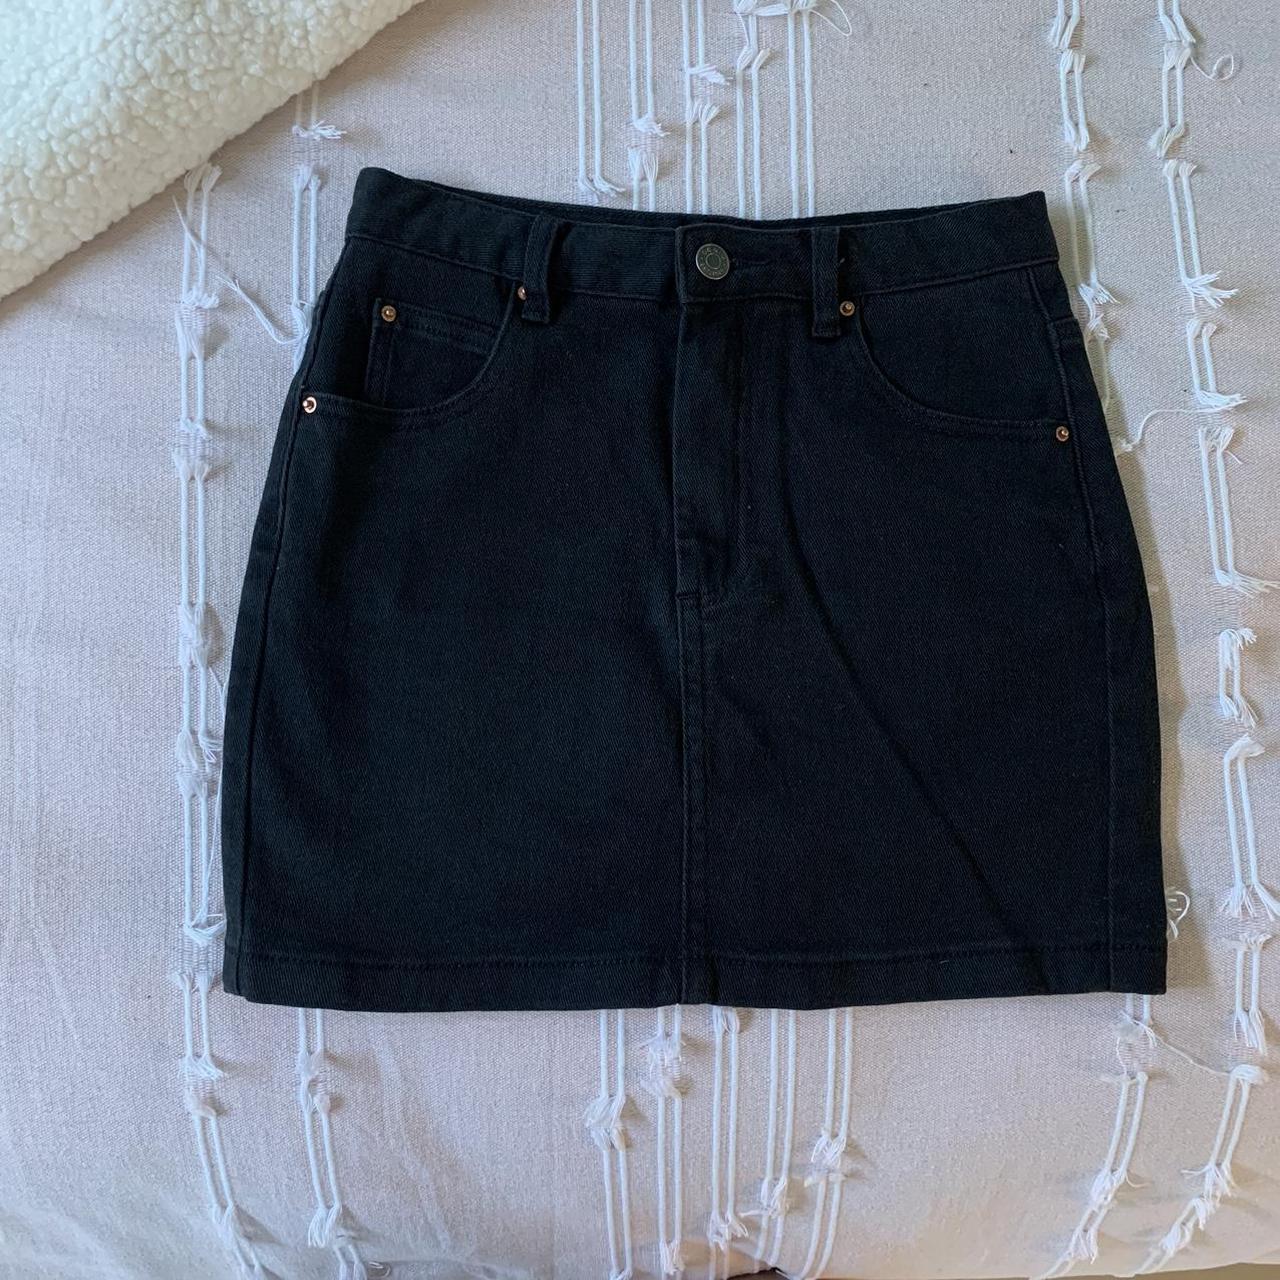 Glassons black skirt in XS (Worn only once) - Depop